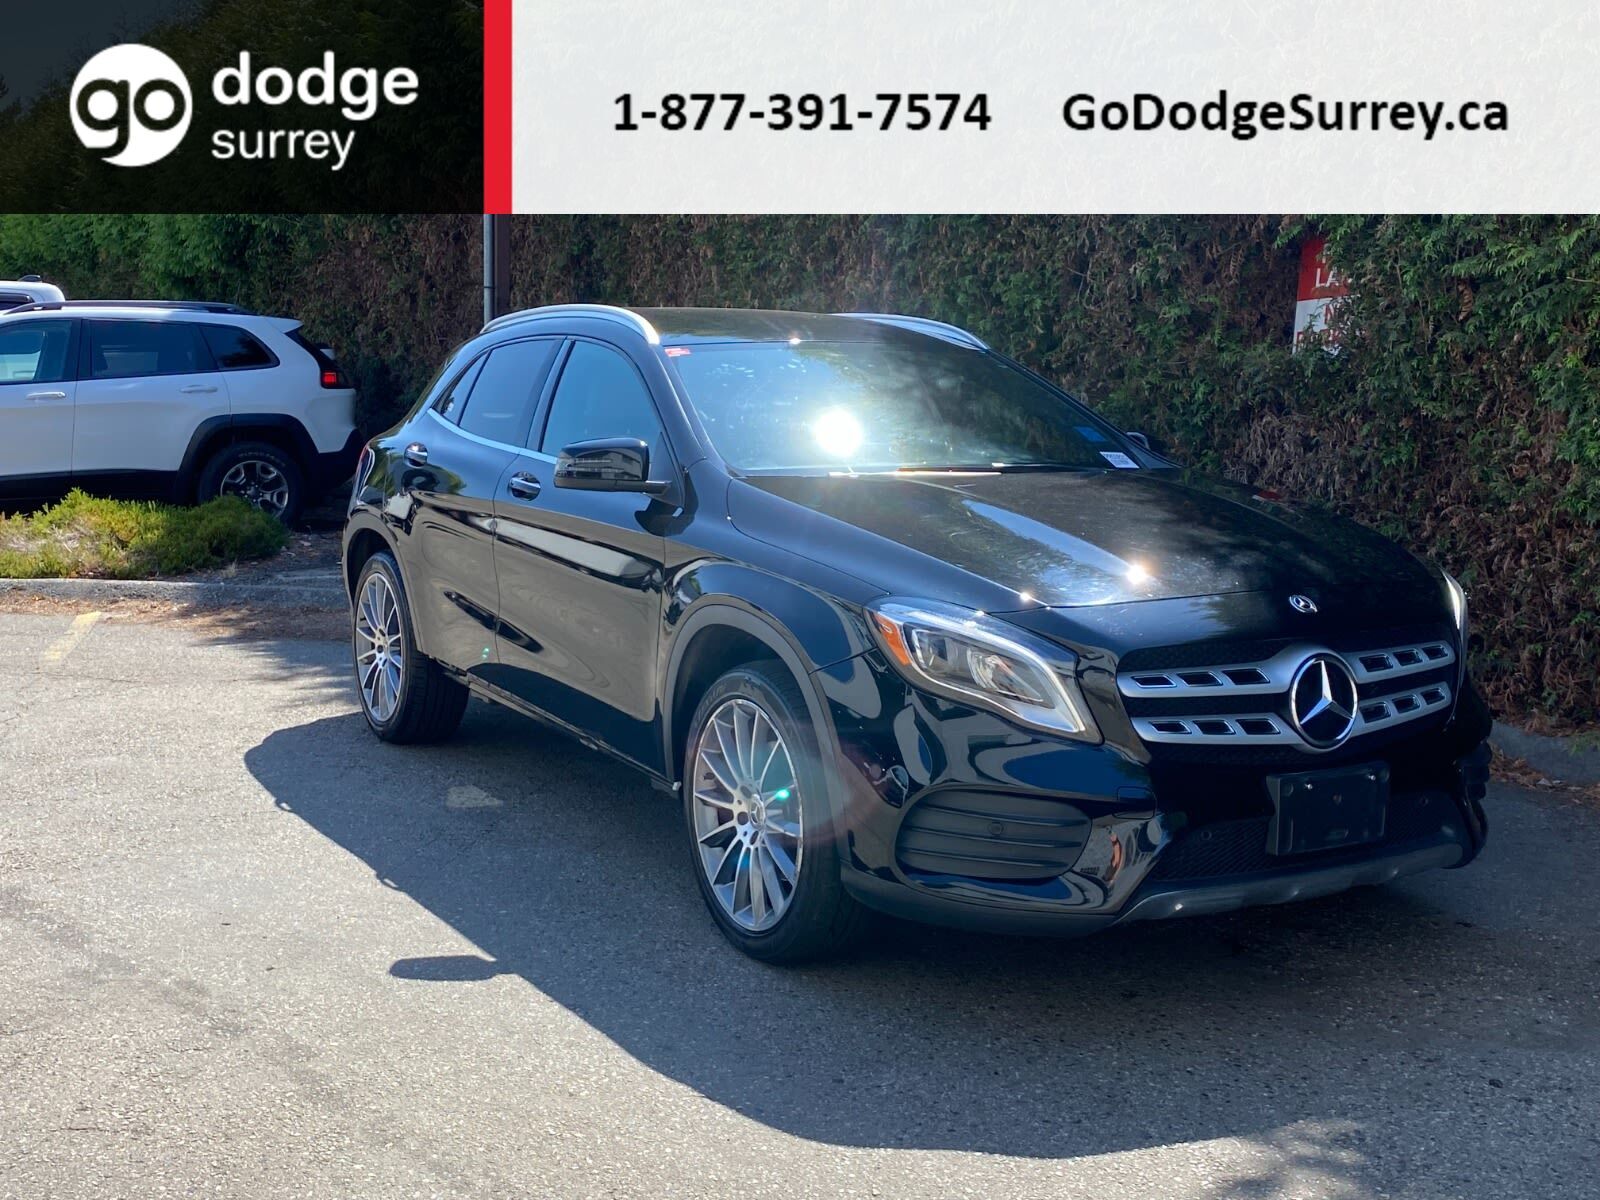 2018 Mercedes-Benz GLA GLA 250 - AWD/LEATHER/REAR VIEW CAM/NO EXTRA FEES